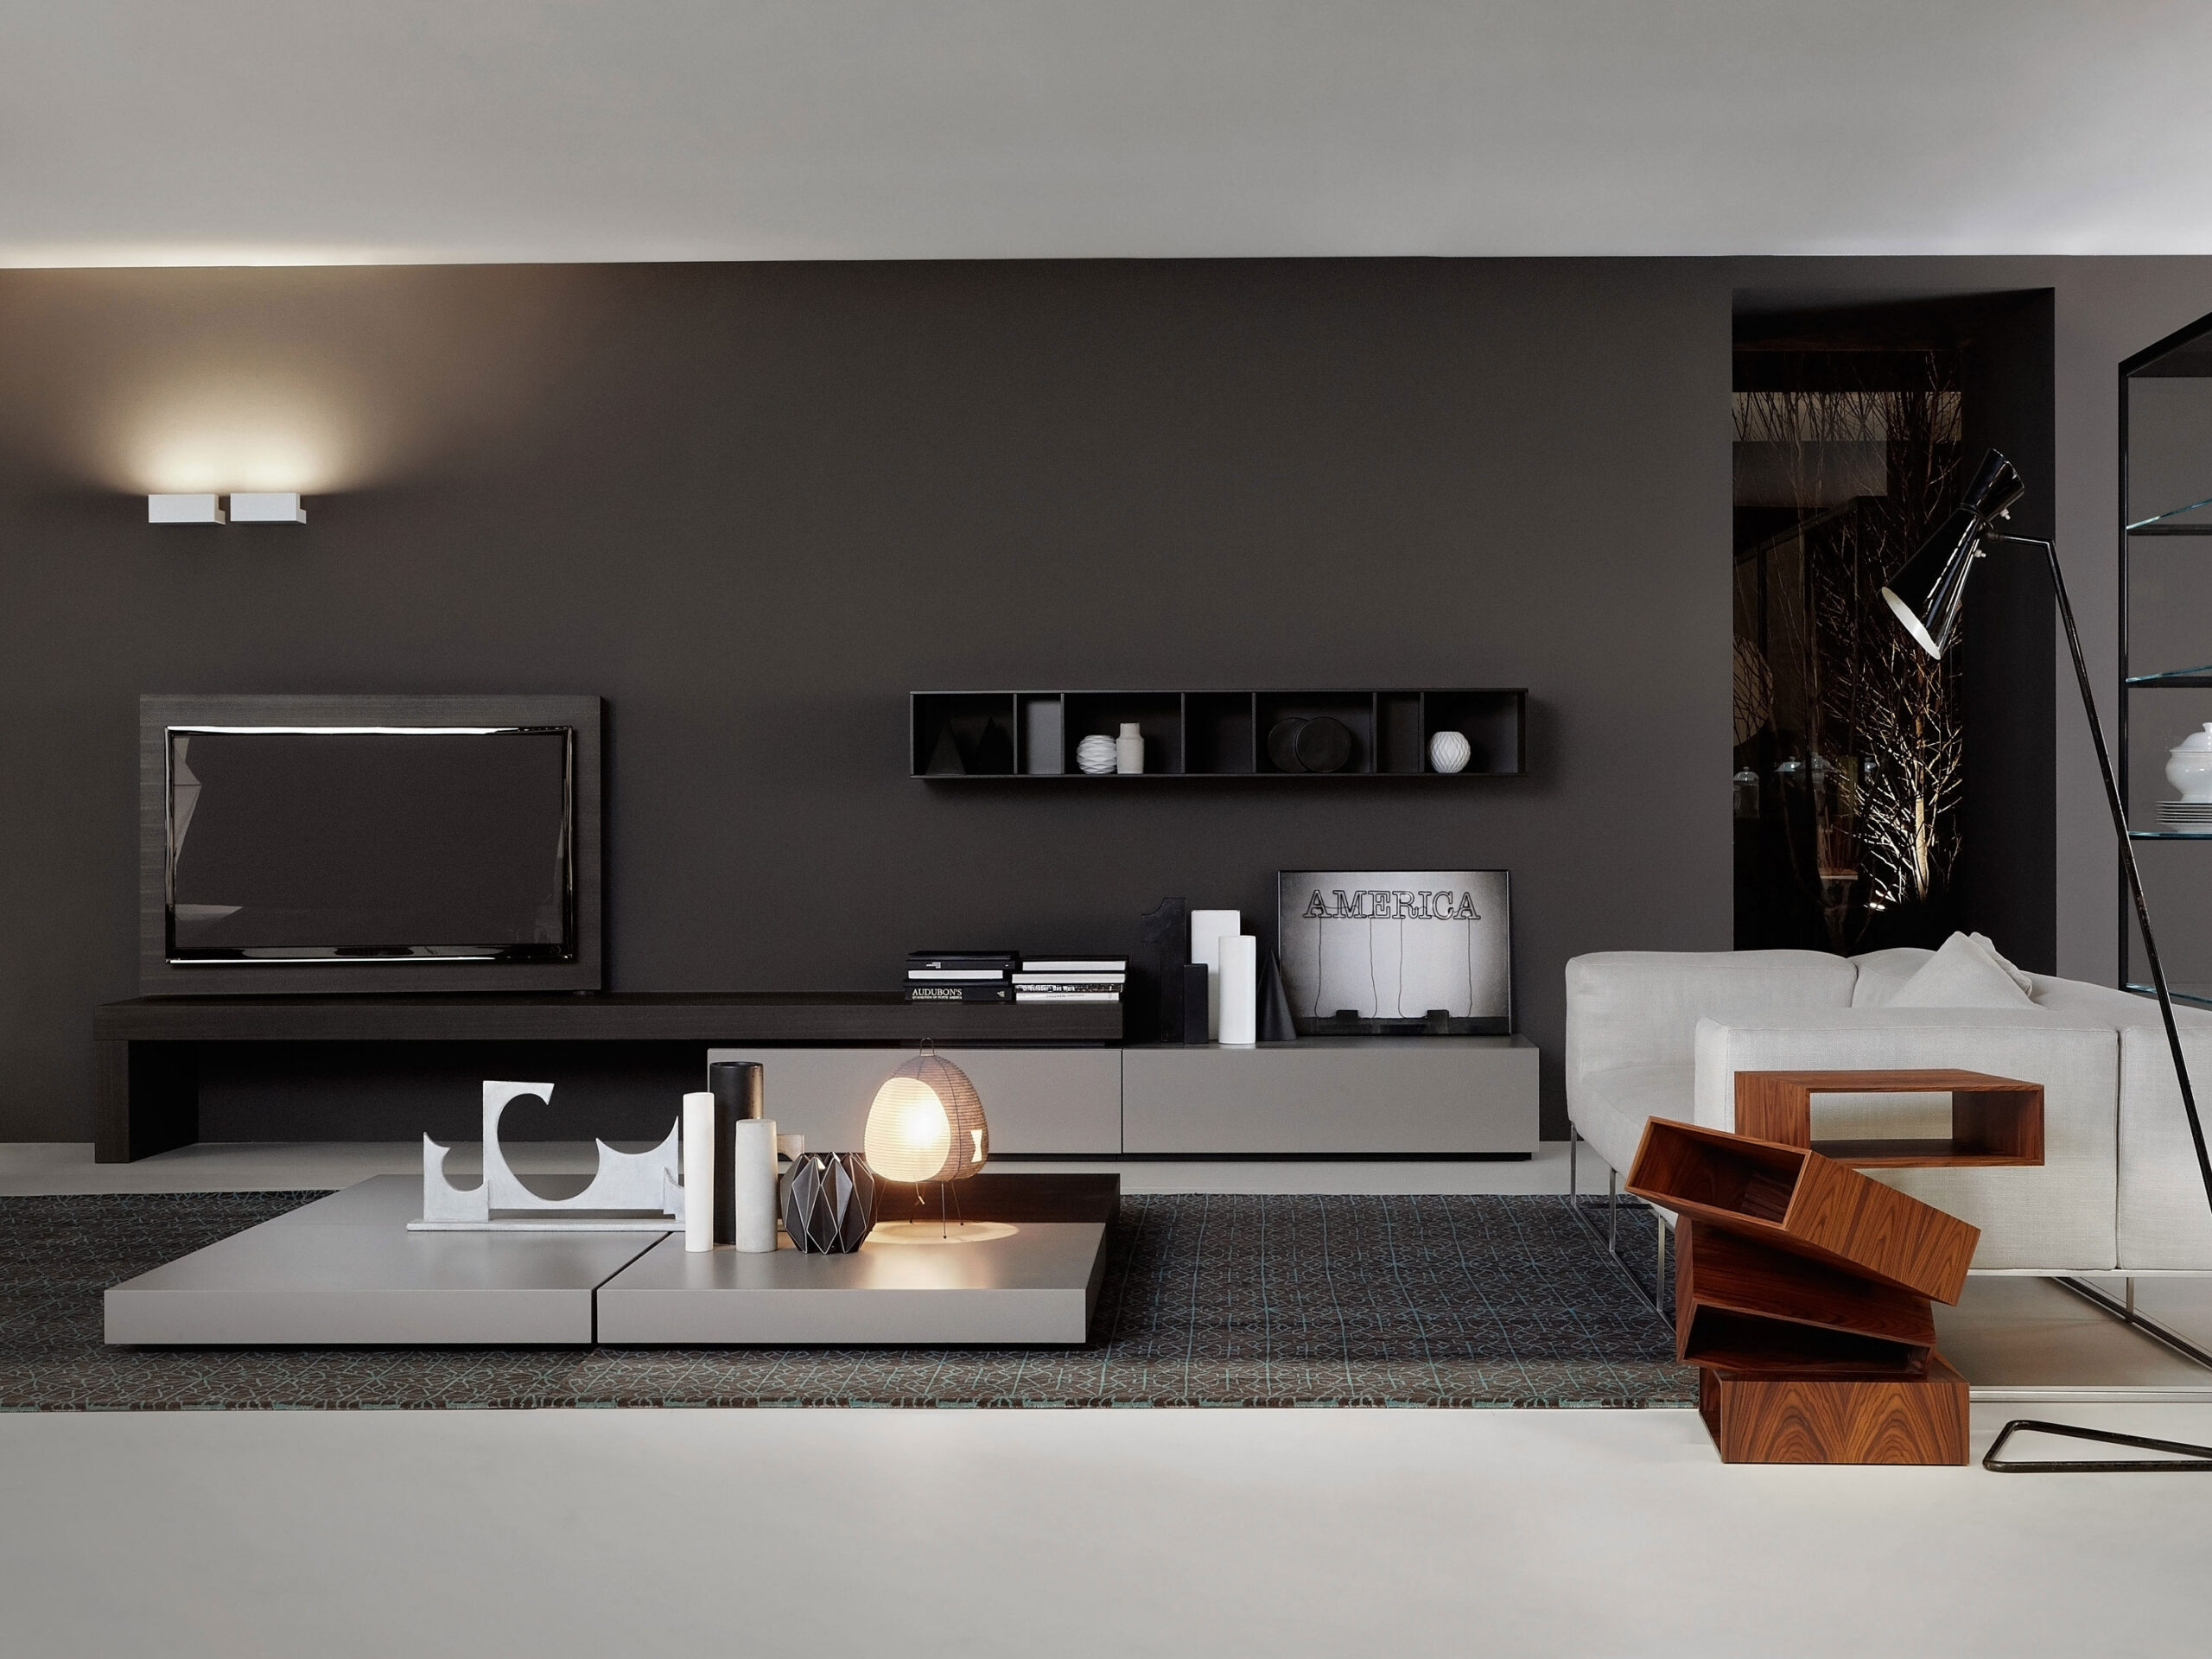 only furniture but design-oriented - TV not also practical,